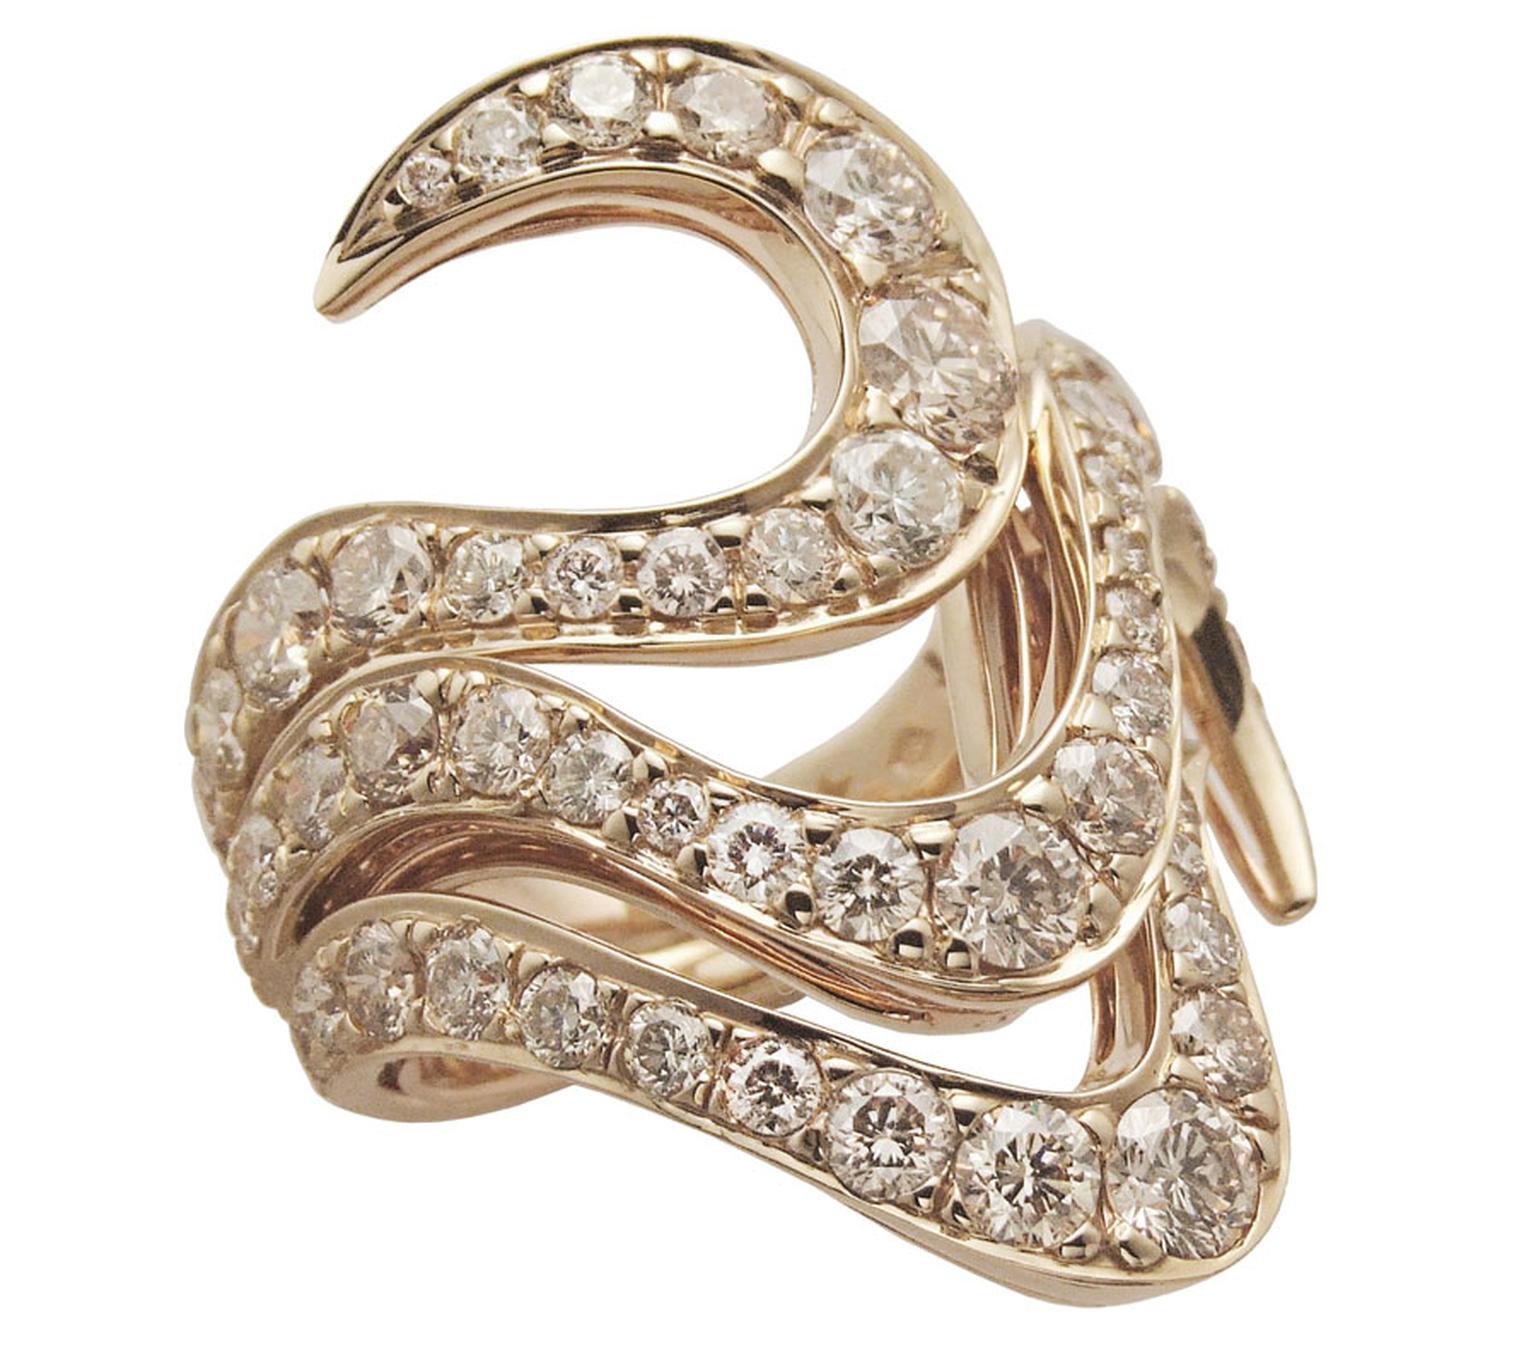 H-Stern-Ring-in-yellow-and-rose-gold-with-diamonds.jpg